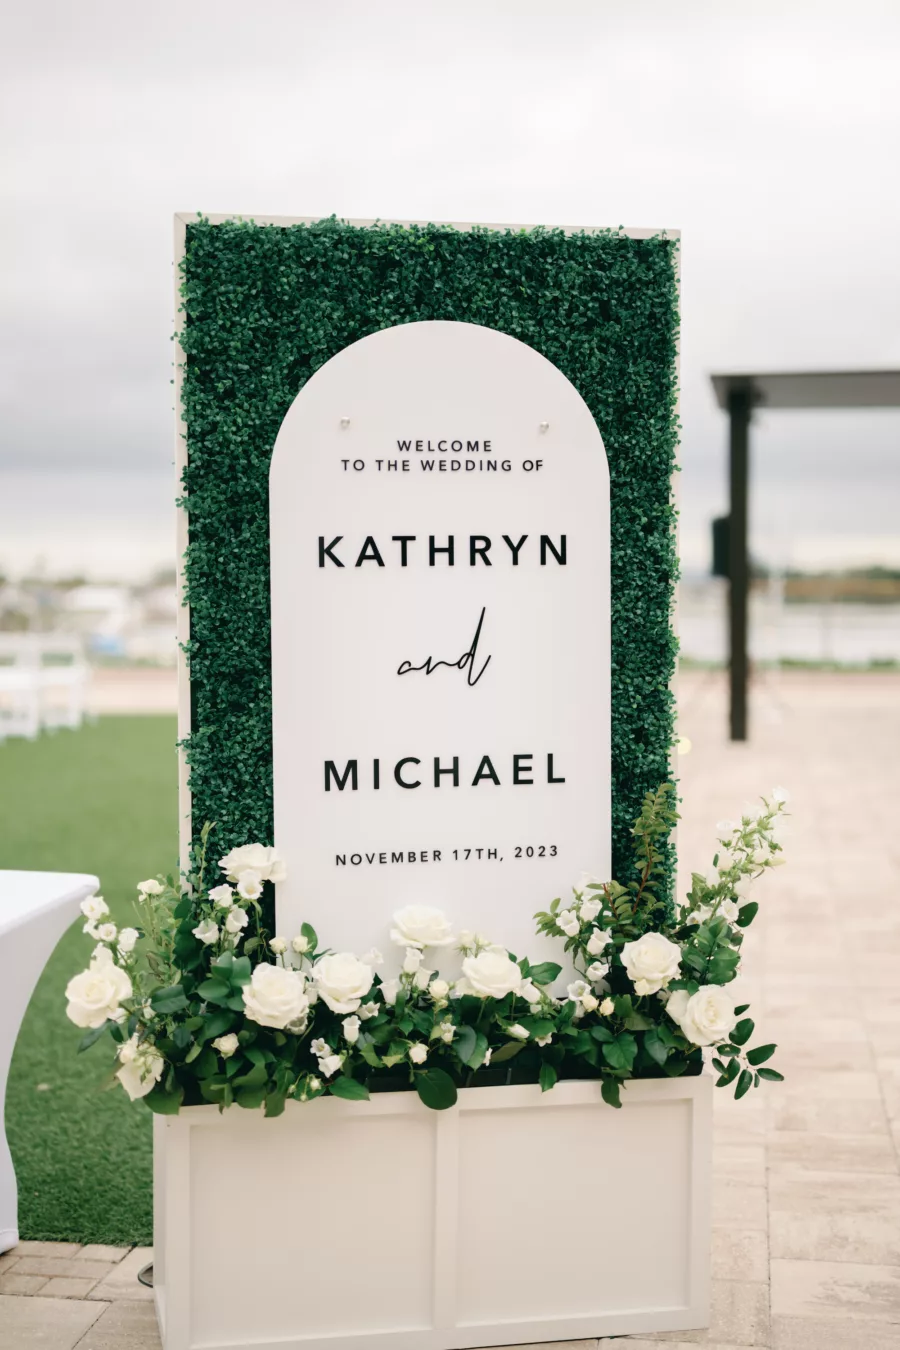 Modern Black and White Arch Welcome Wedding Sign Decor Display Inspiration | Grass Wall Backdrop, and Planter Box with White Roses and Greenery